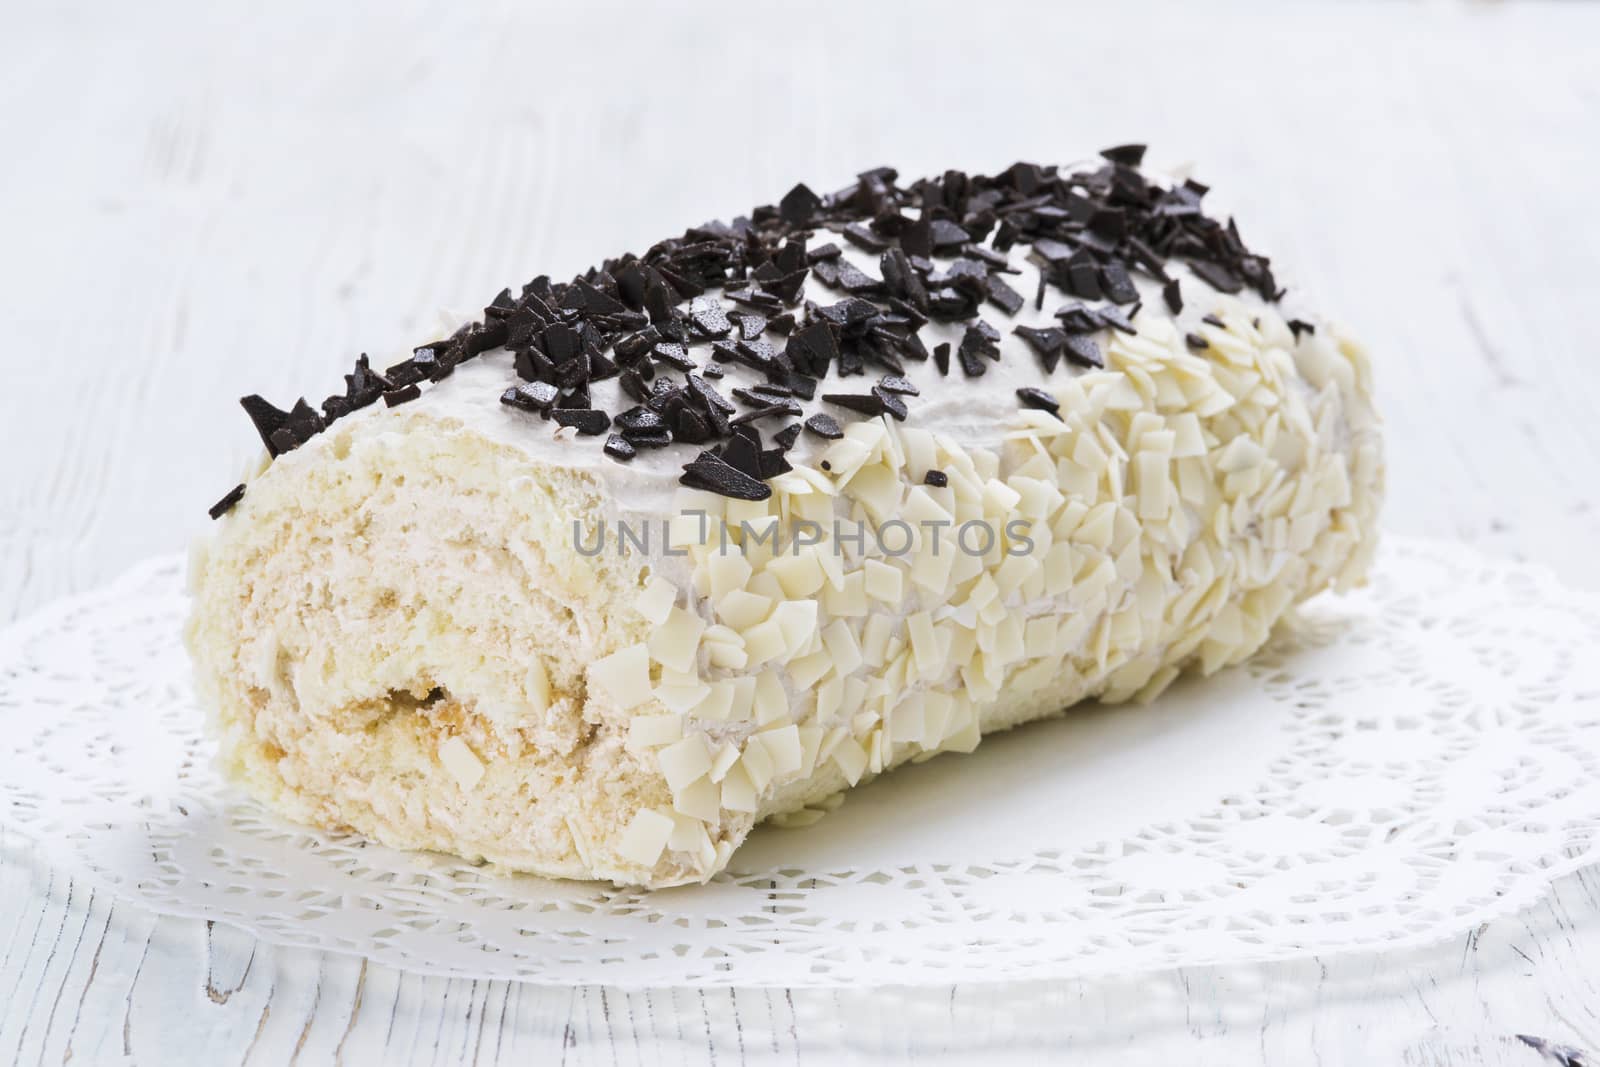 Biscuit roll with chocolate chips by kzen